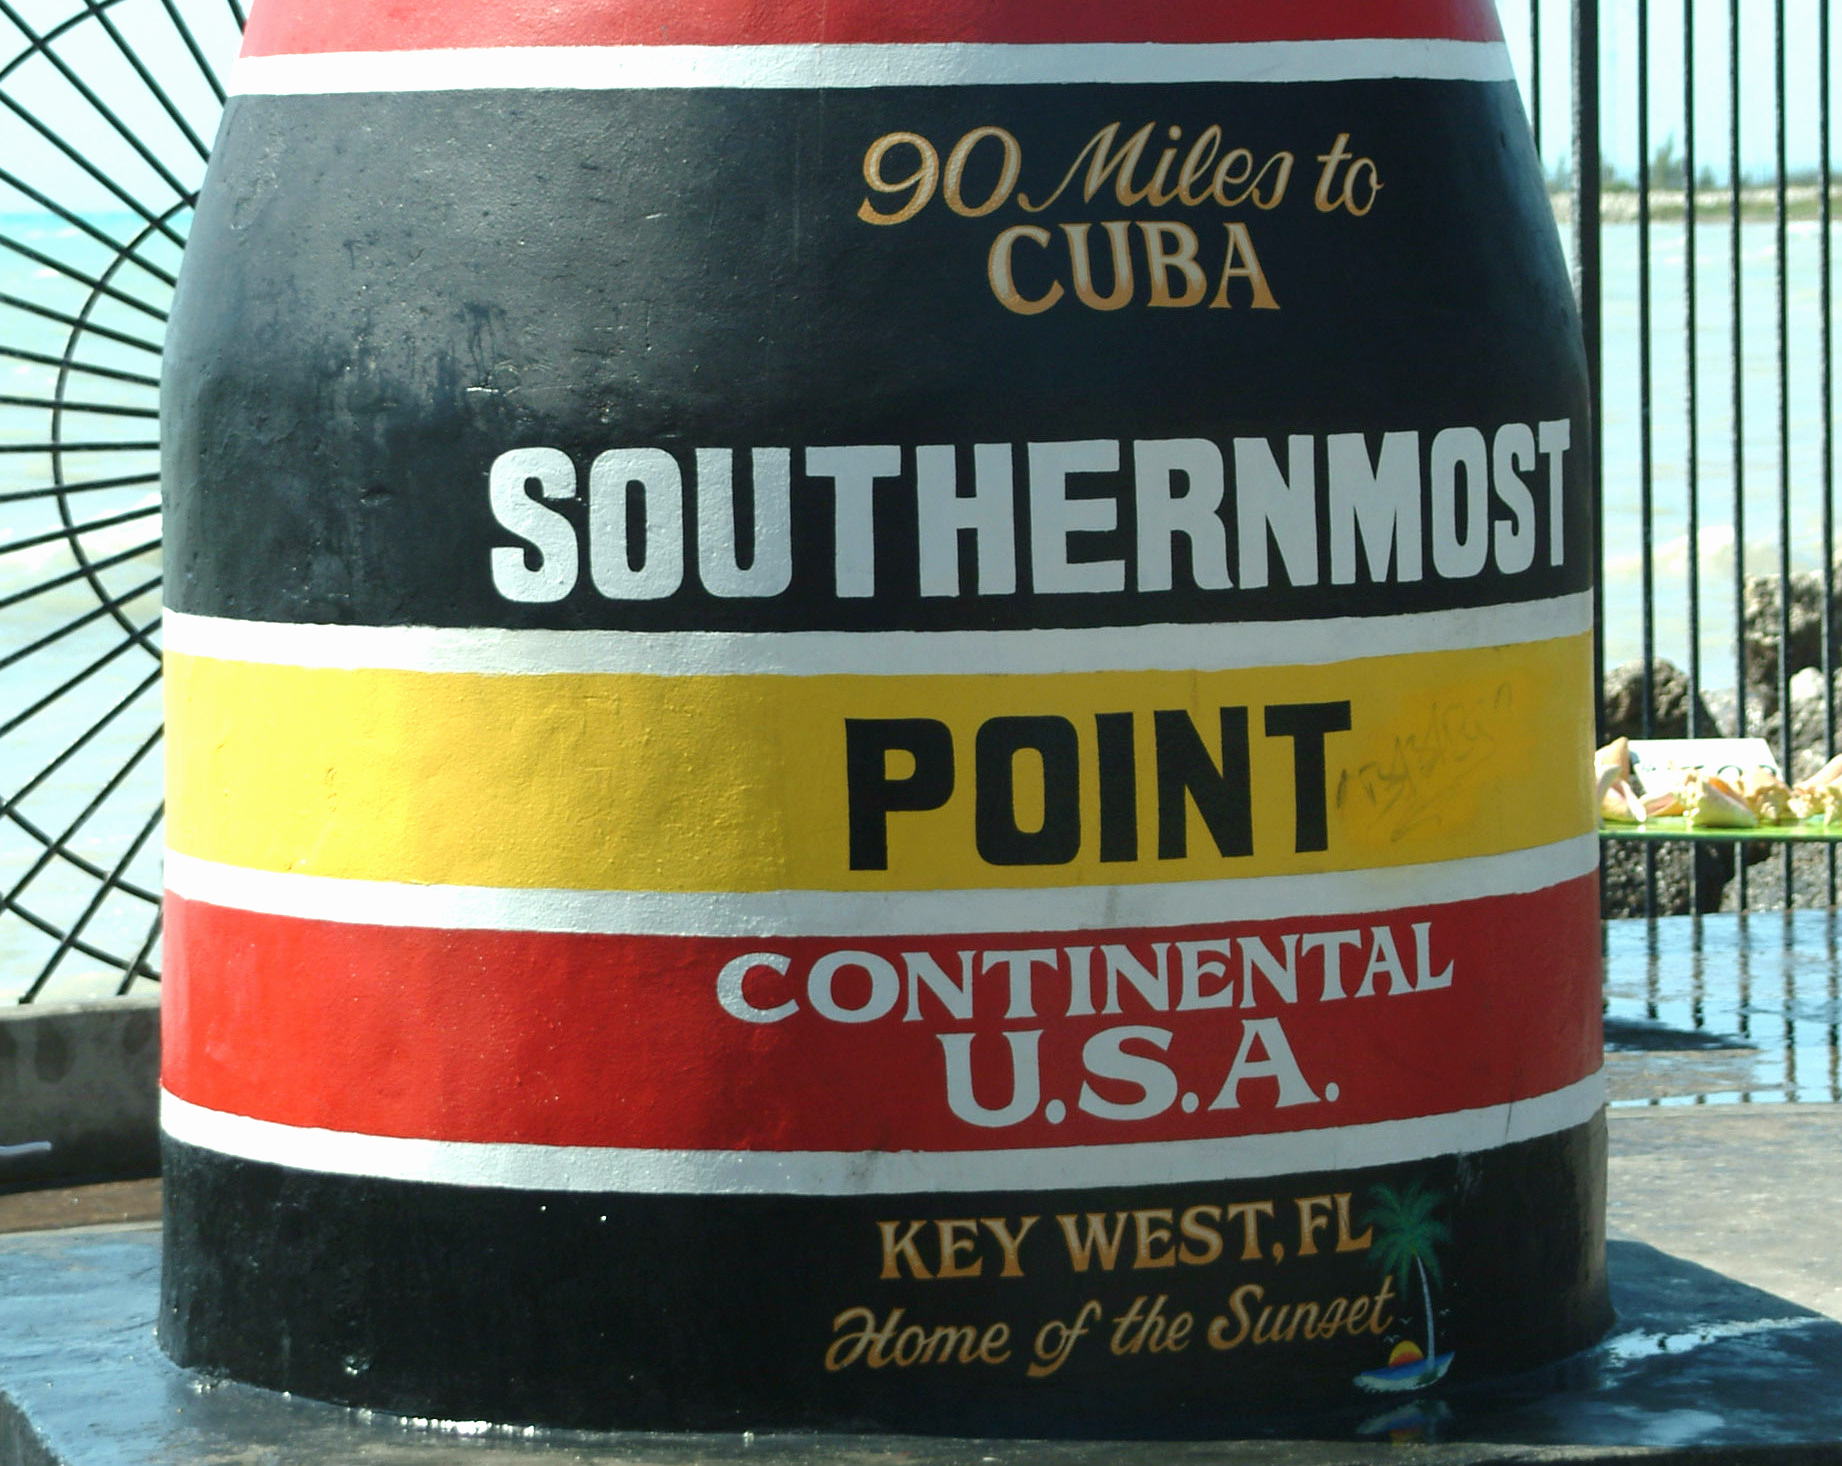 Monument marking the southernmost point in the continental US accessible by civilians